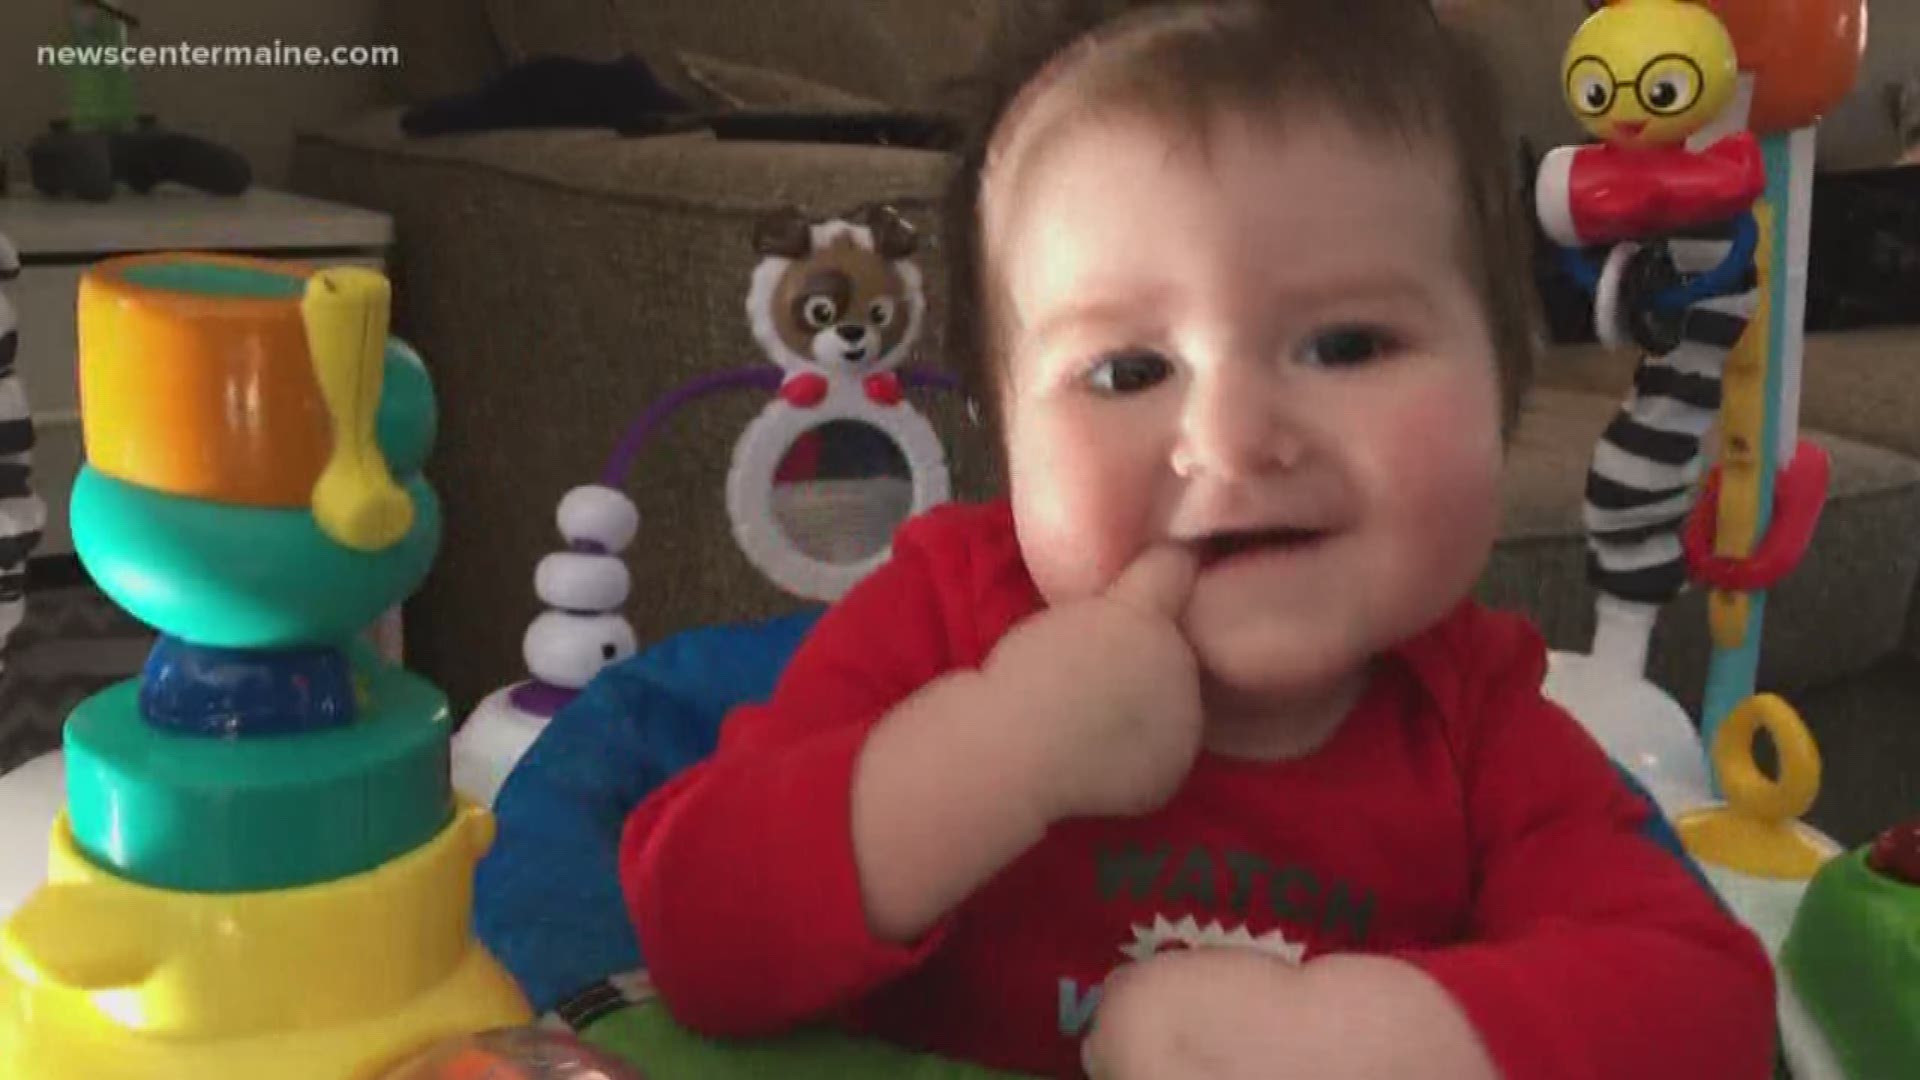 16-month-old Wyatt Sargent needs help from blood transfusions after being diagnosed with a rare, aggressive type of brain tumor.